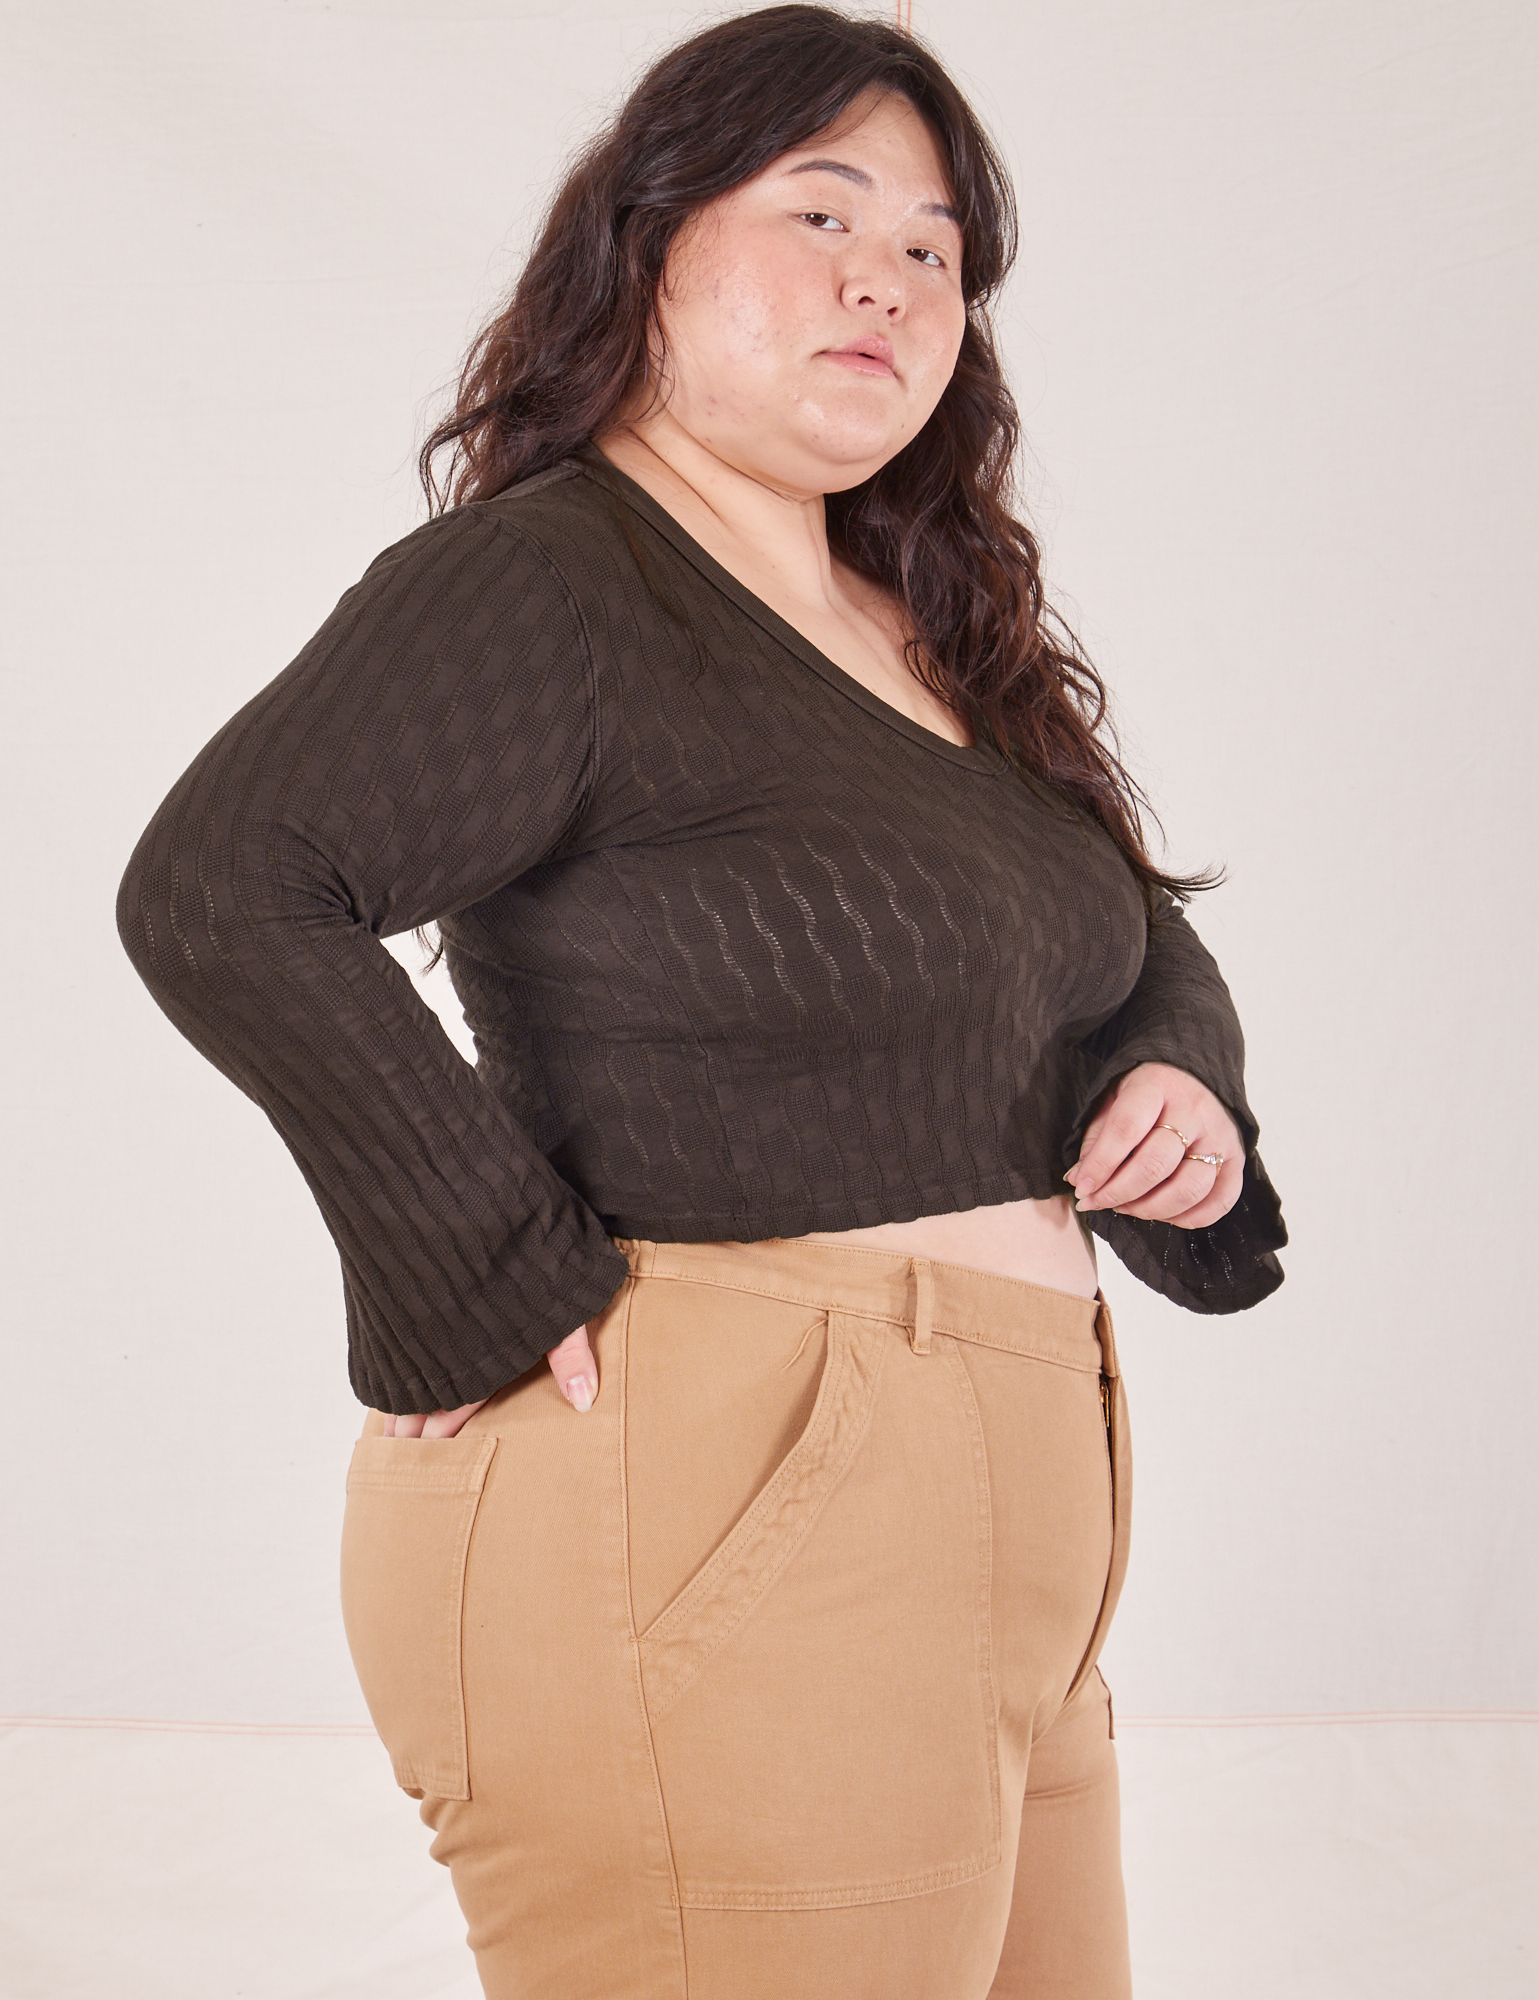 Side view of Bell Sleeve Top in Espresso Brown and tan Work Pants worn by Ashley